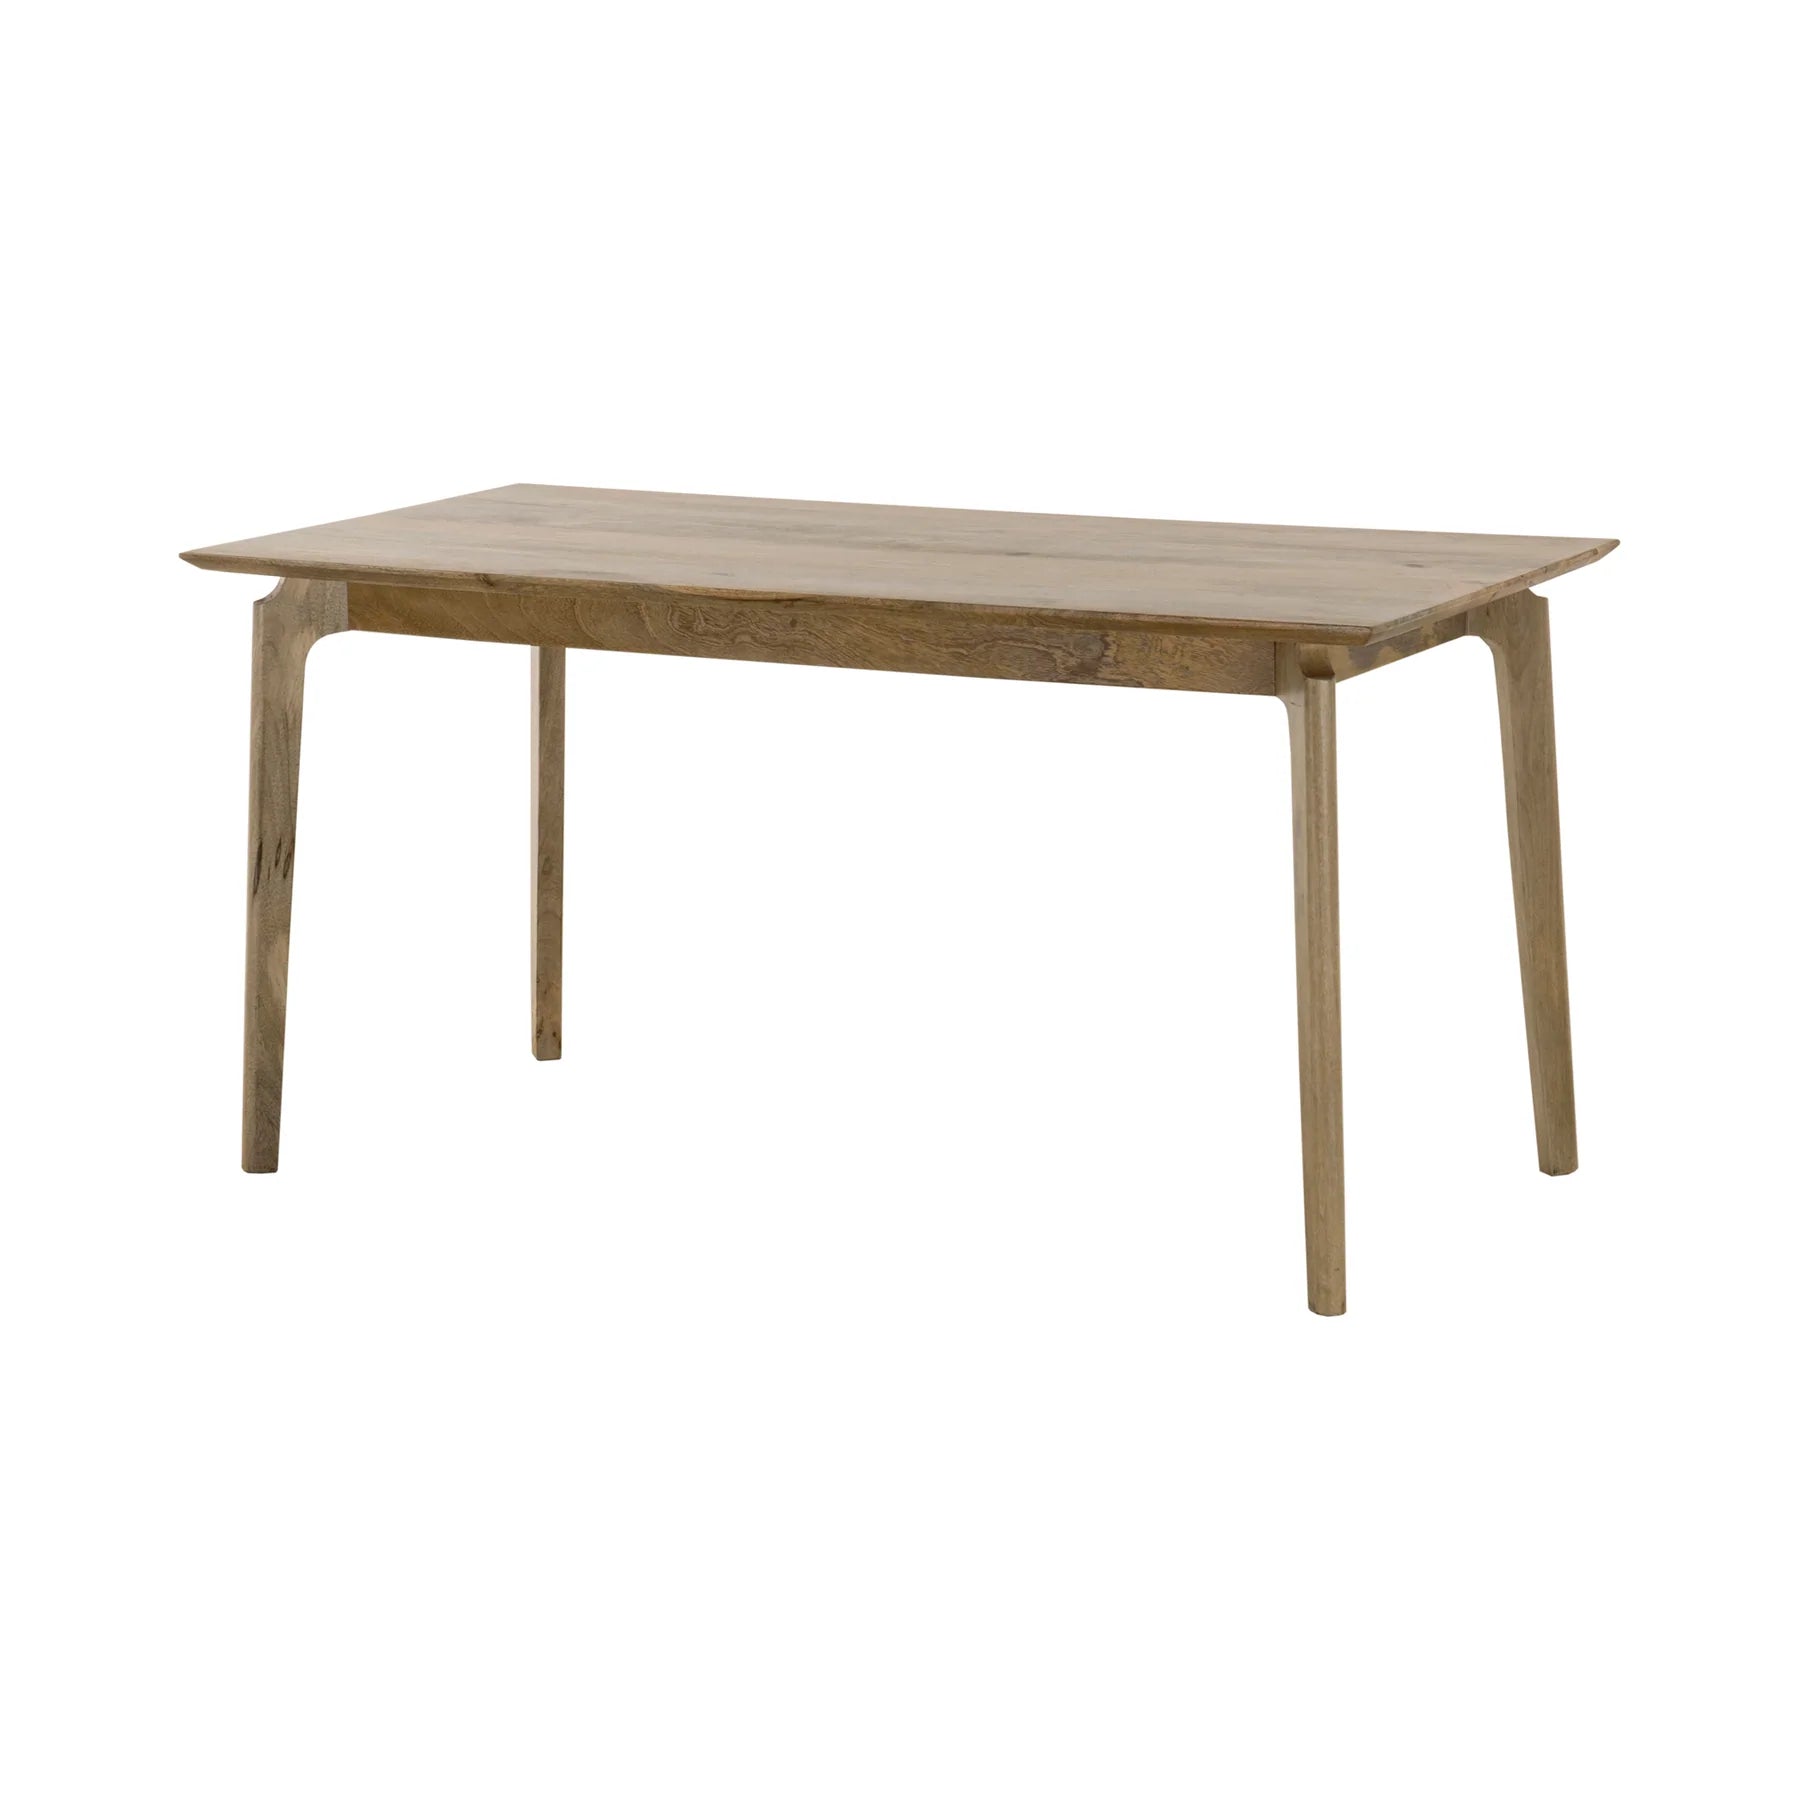 Kenzo Dining Table- Natural, brown or black